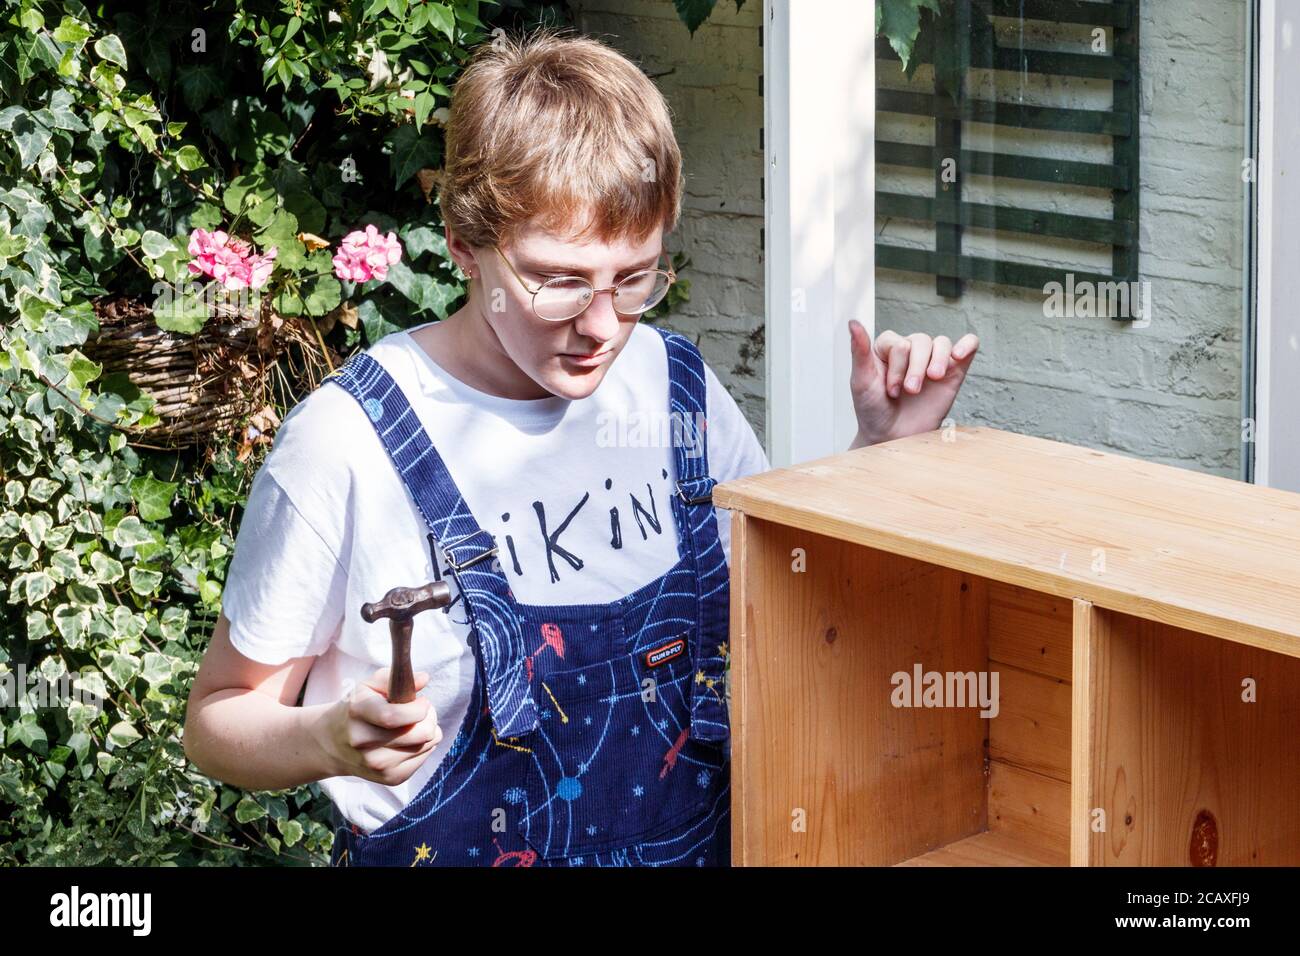 20-year old Caucasian young woman constructing a wooden bookcase at home, London, UK Stock Photo